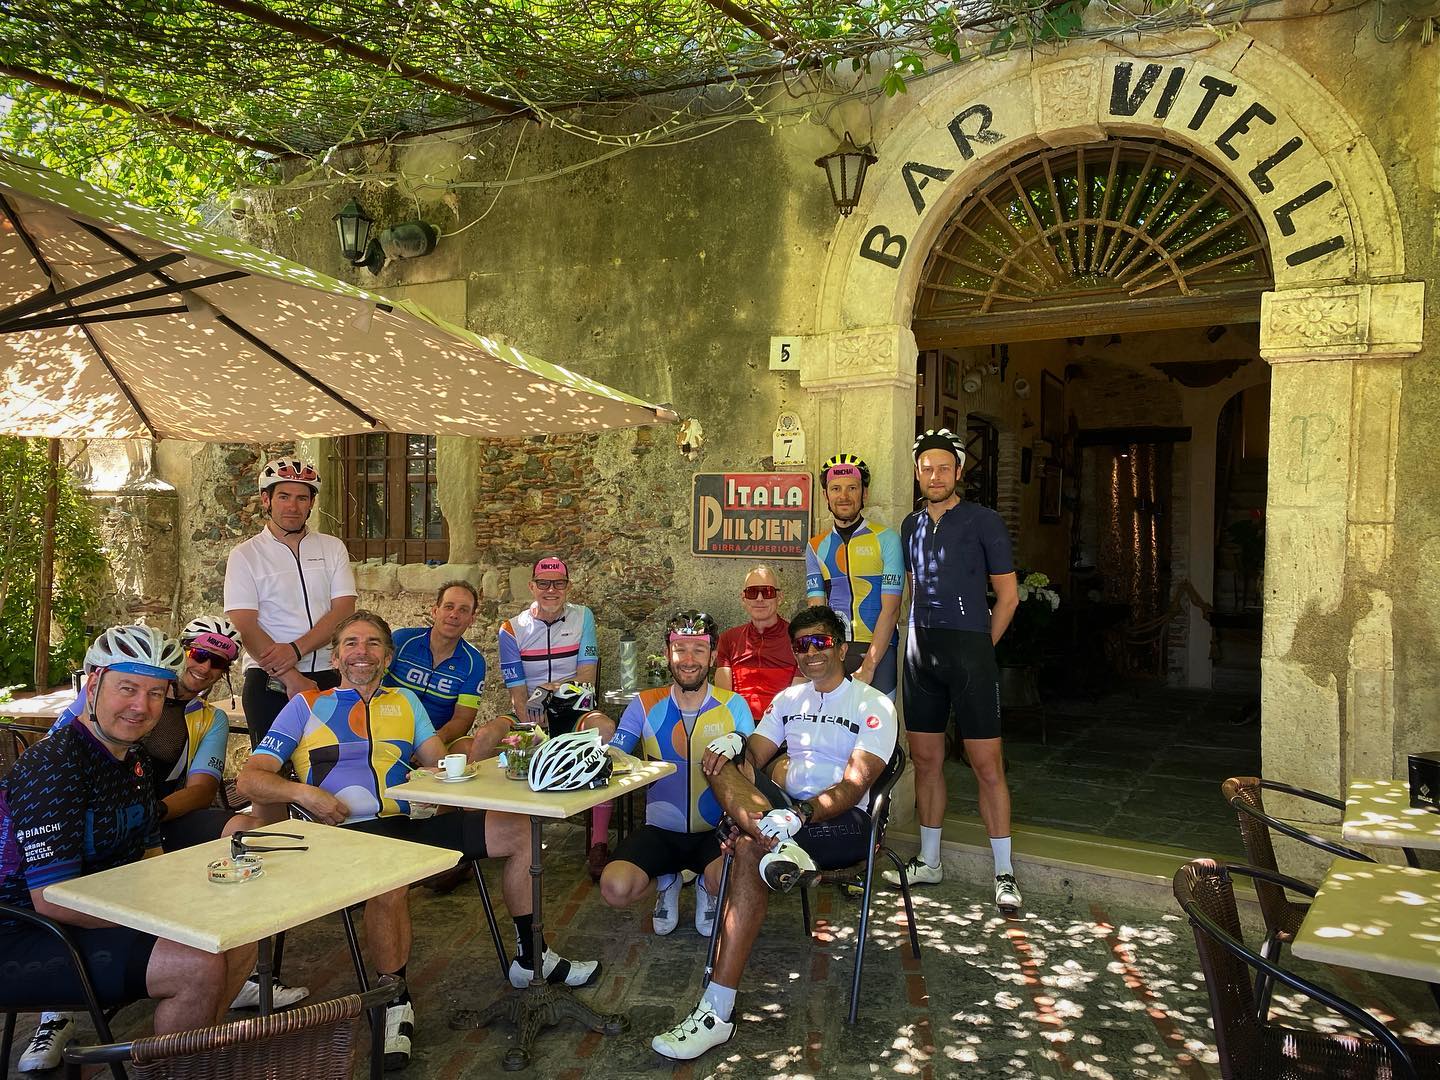 Giro 2022 Camp from 8 to 14 of May was one of the best week we ever had! A lot of friends, climbs and laughs! 🤣

#sicilycycling #cyclinginsicily #scc #cyclingphotos #cycling #cyclingtravel #sicilycyclingclub #peloton #backroads #ingamba #duvine #pelotonmagazine #cyclingtours #sicilianlesson